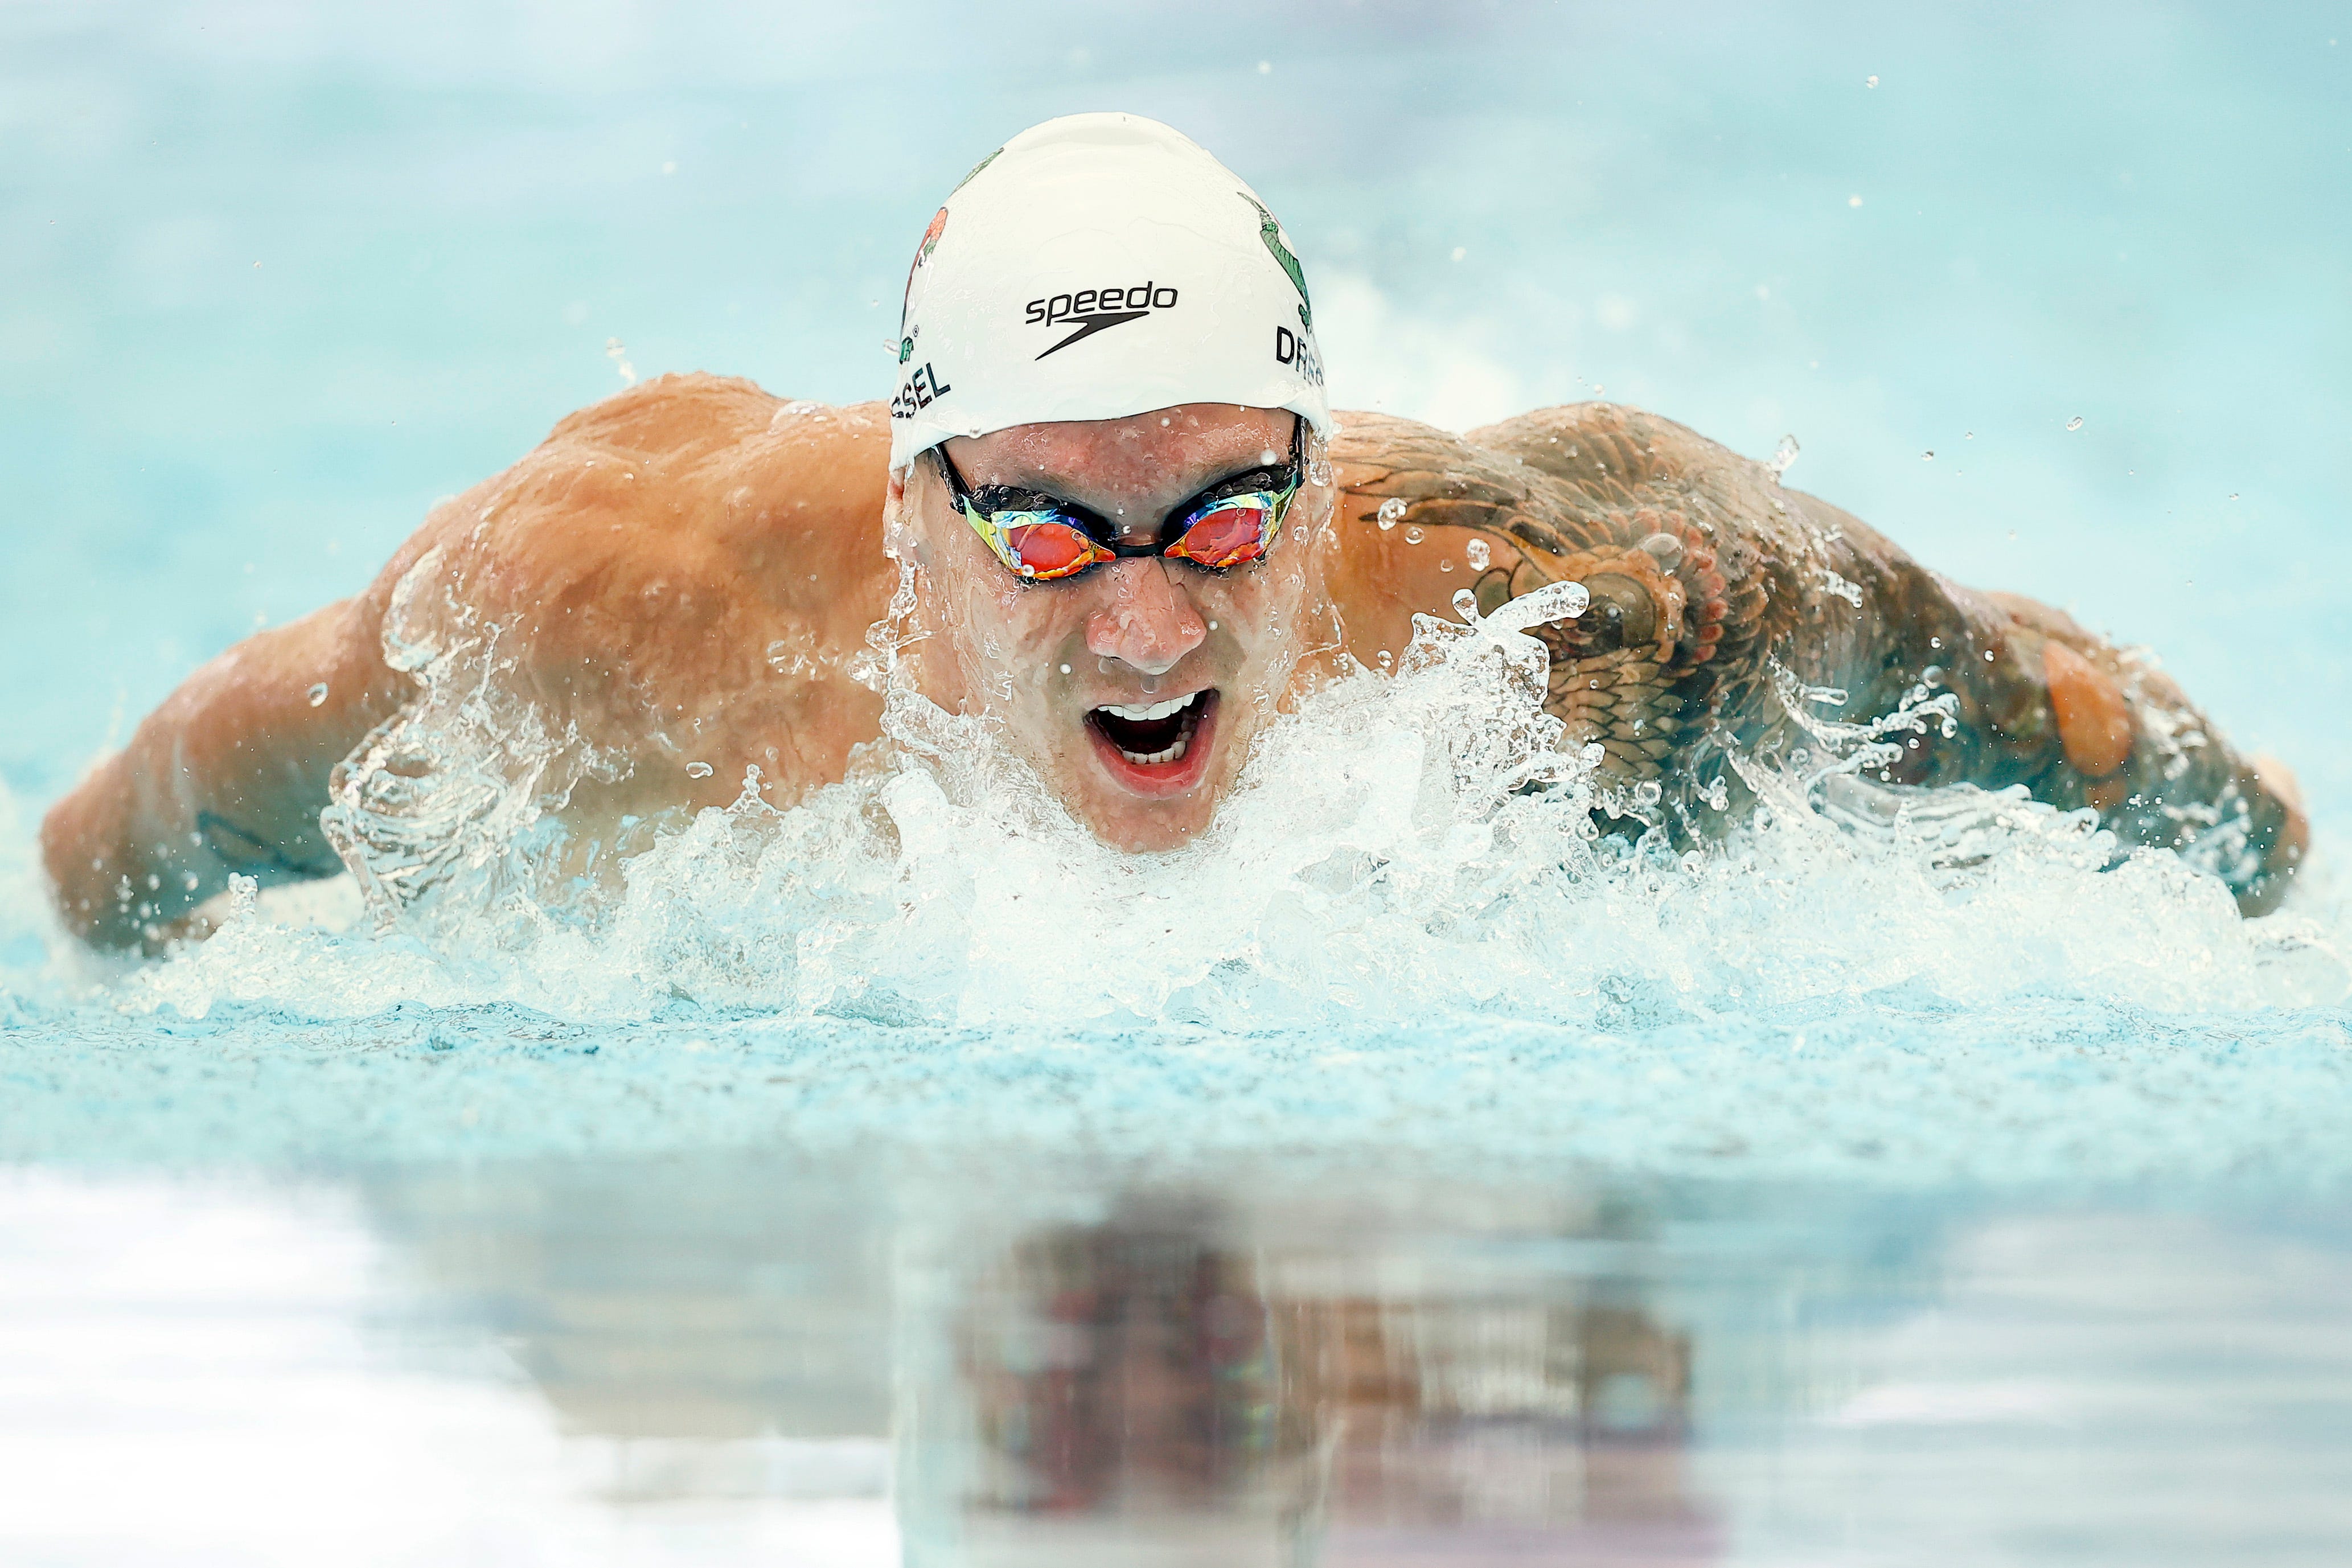 Caleb Dressel competes in the Men's 200 Meter Butterfly Heats on Day Two of the TYR Pro Swim Series at San Antonio on March 4, 2021 in San Antonio, Texas.